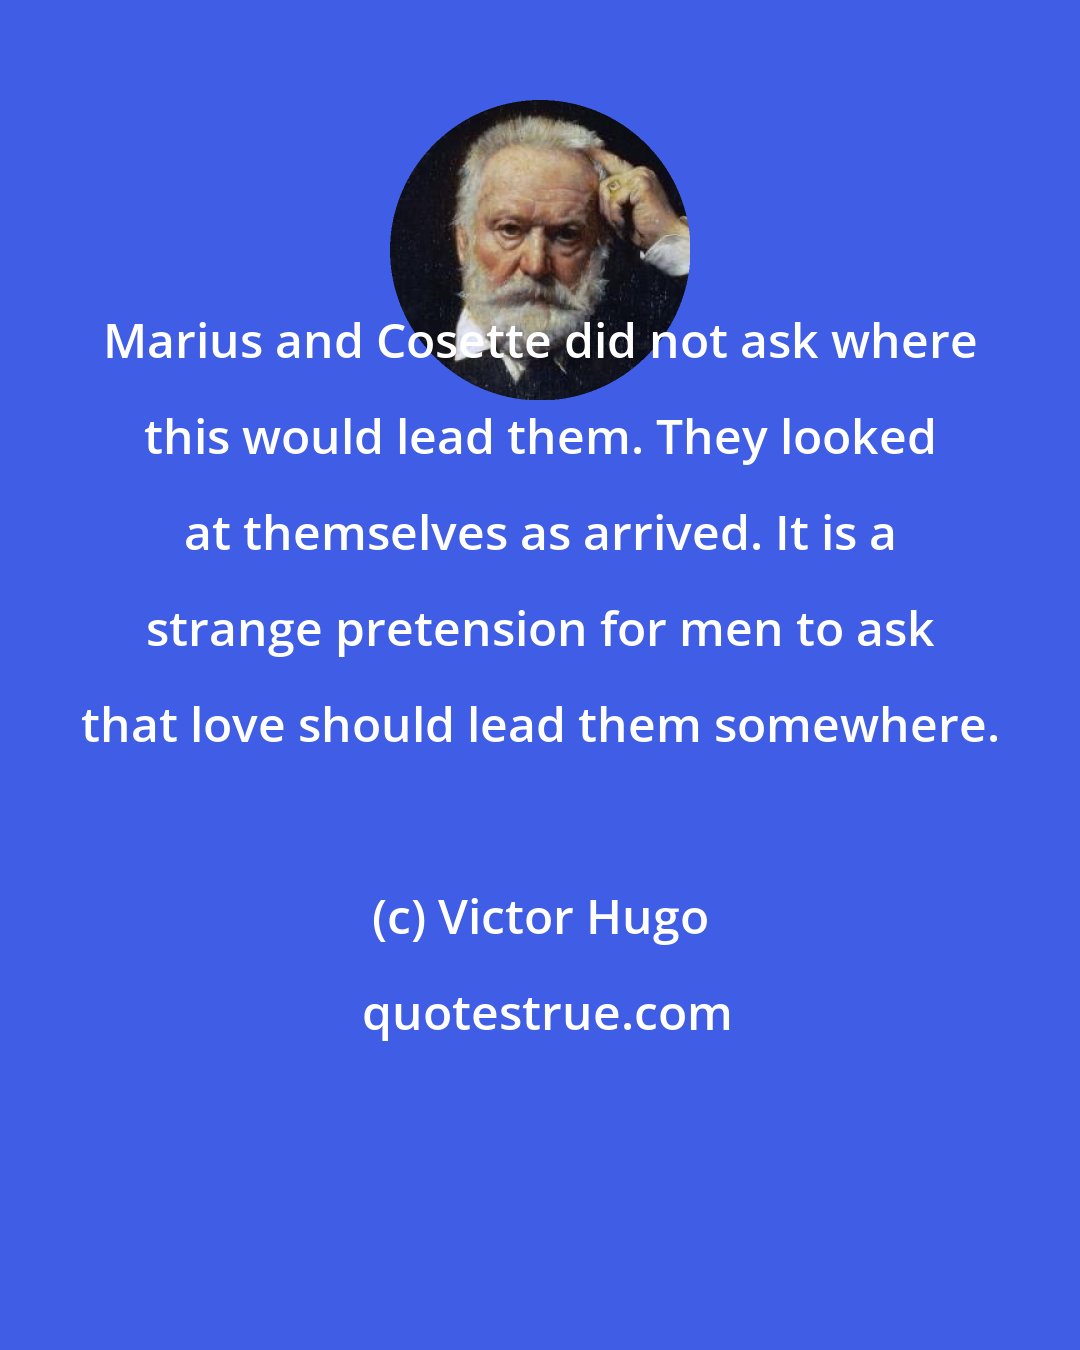 Victor Hugo: Marius and Cosette did not ask where this would lead them. They looked at themselves as arrived. It is a strange pretension for men to ask that love should lead them somewhere.